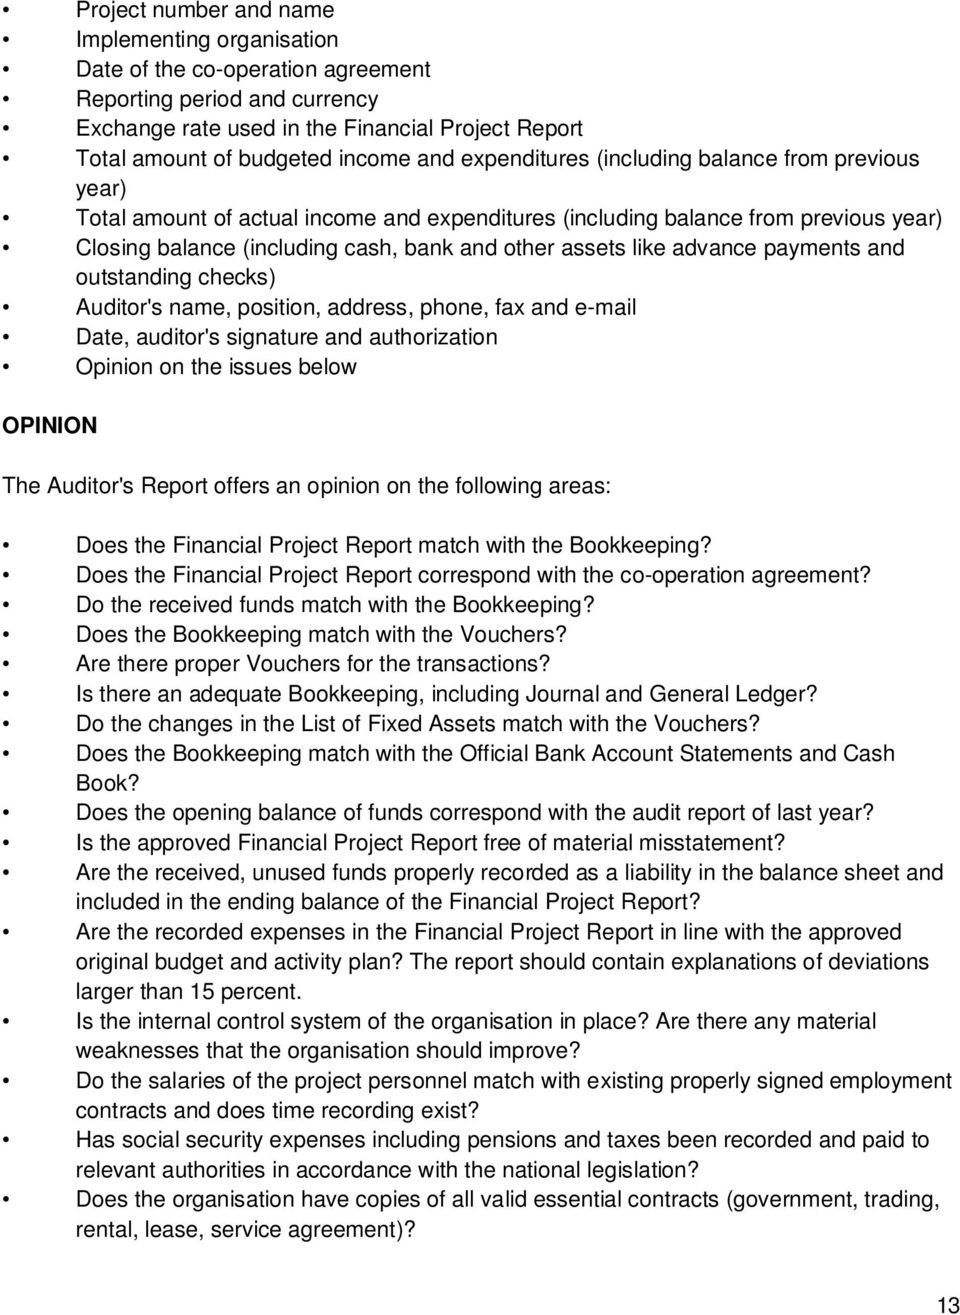 like advance payments and outstanding checks) Auditor's name, position, address, phone, fax and e-mail Date, auditor's signature and authorization Opinion on the issues below OPINION The Auditor's